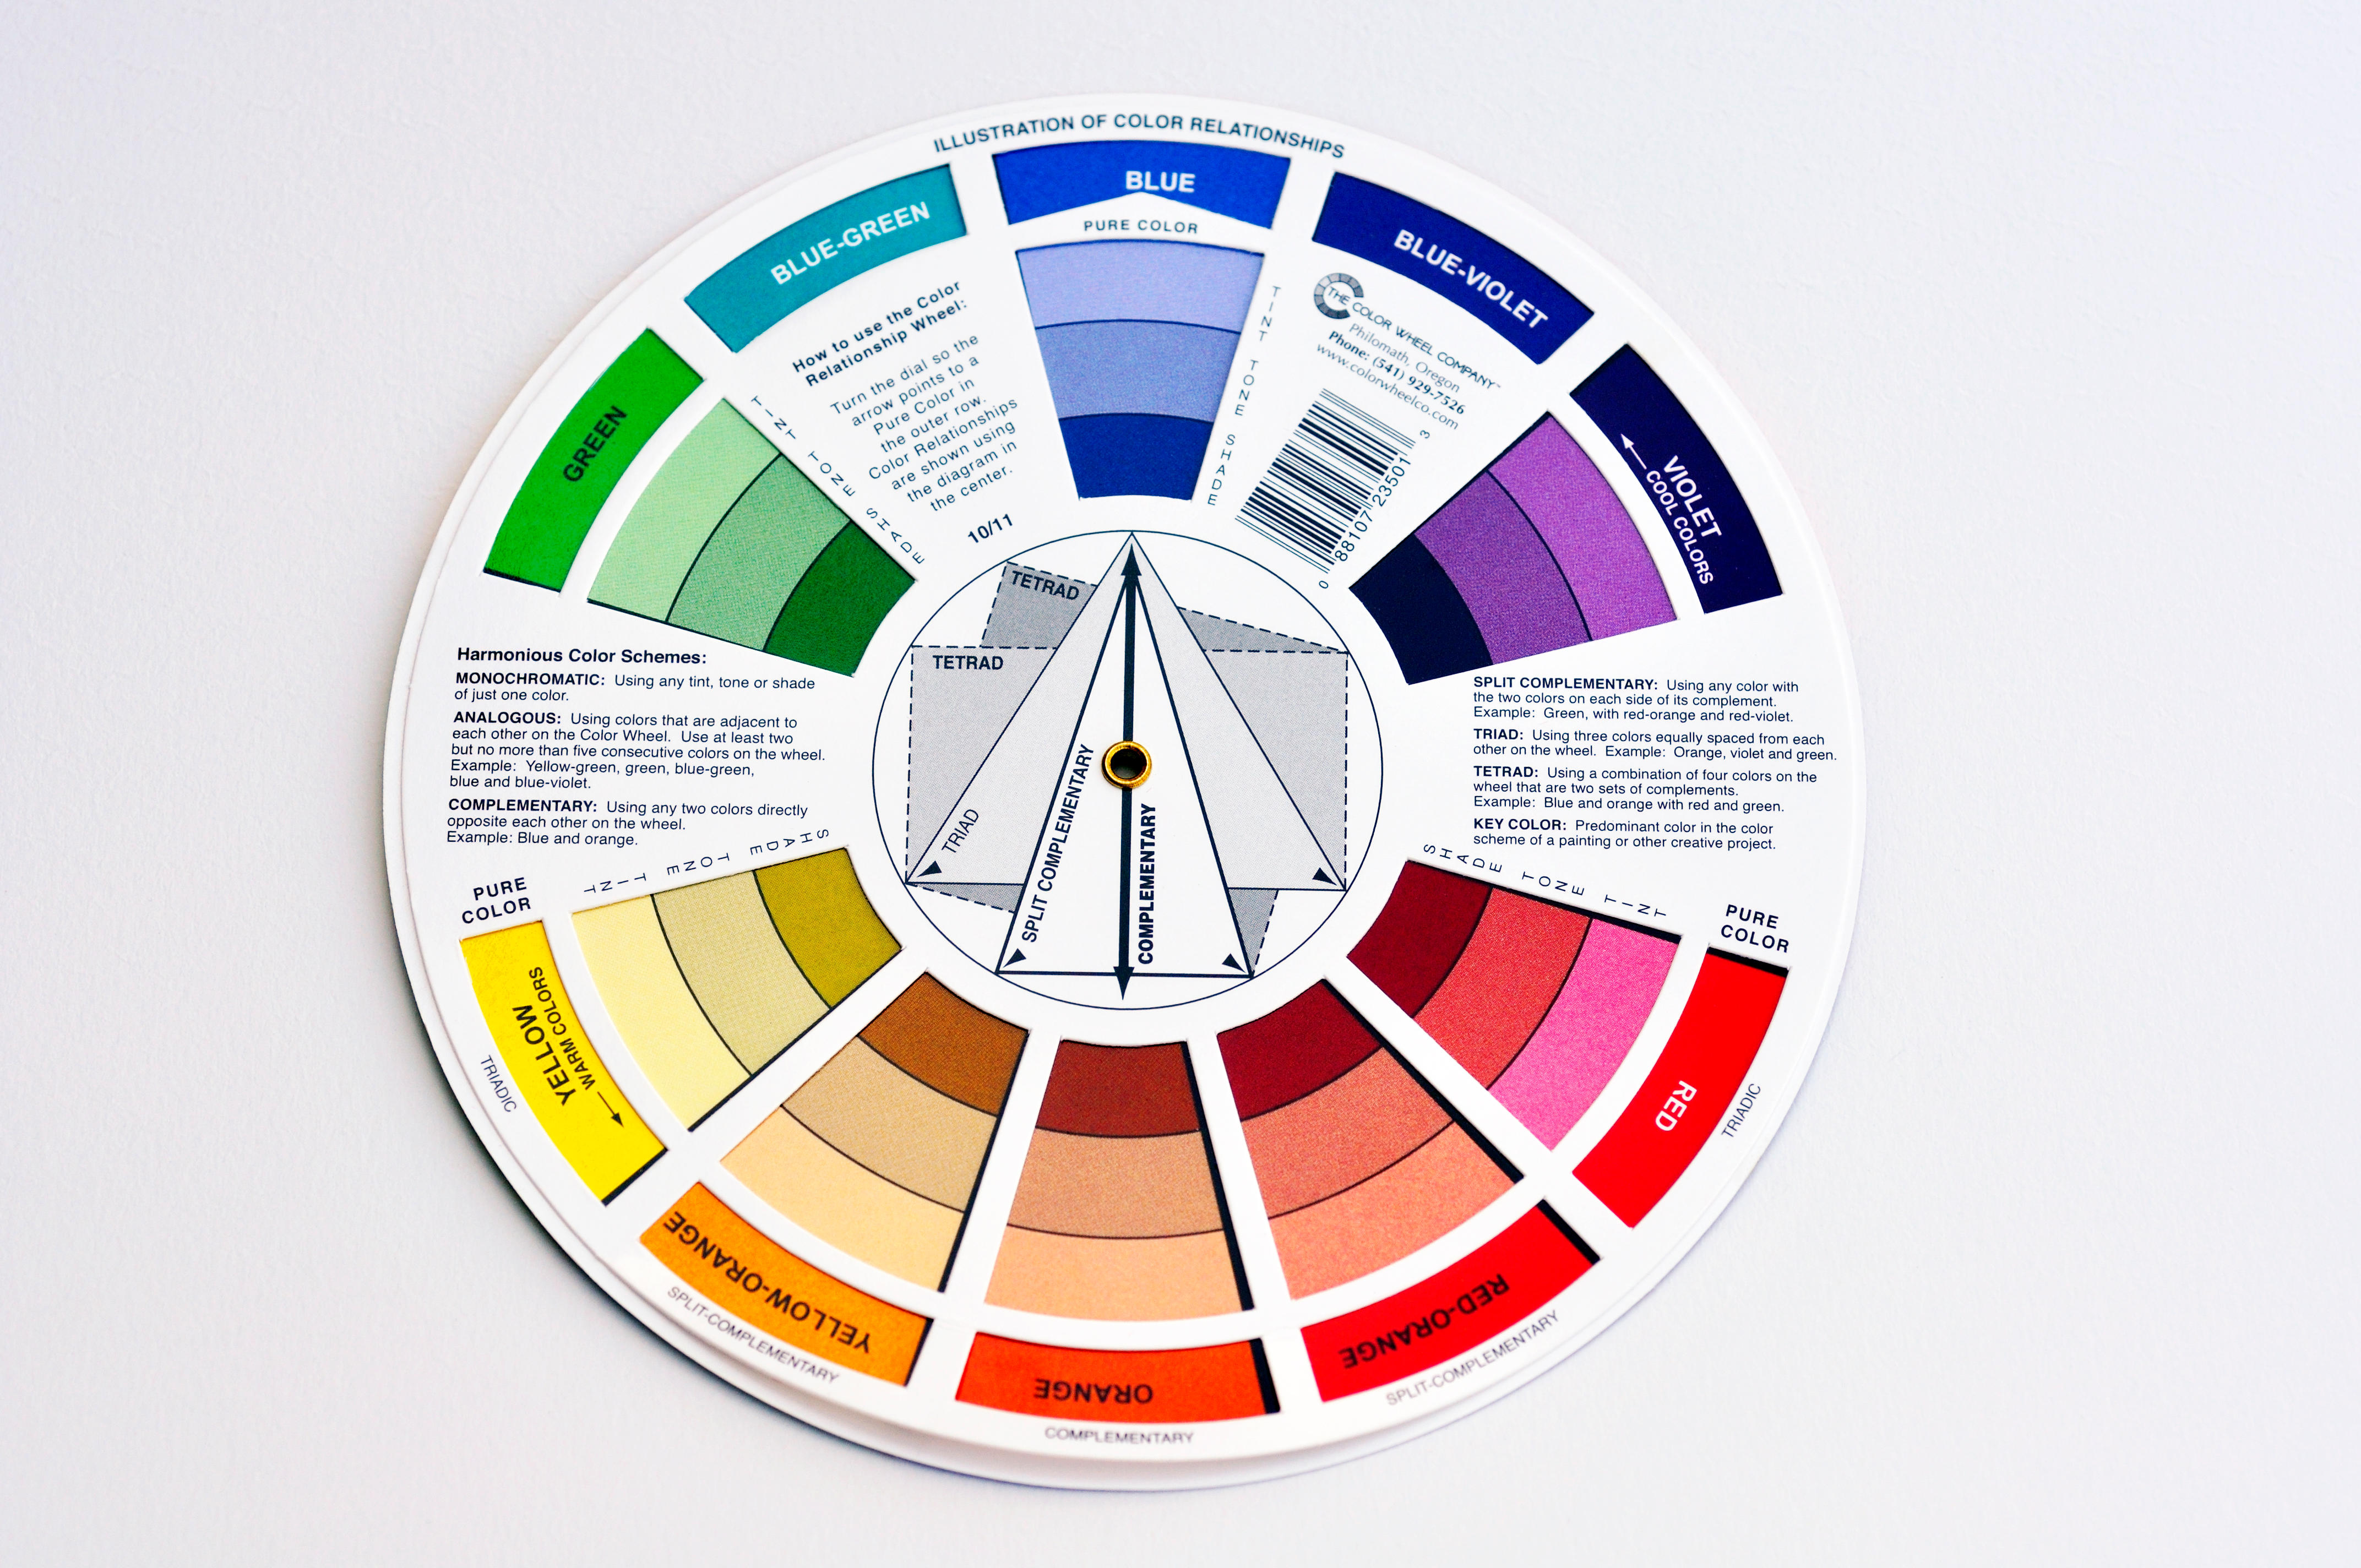 How to use a color wheel for interior design